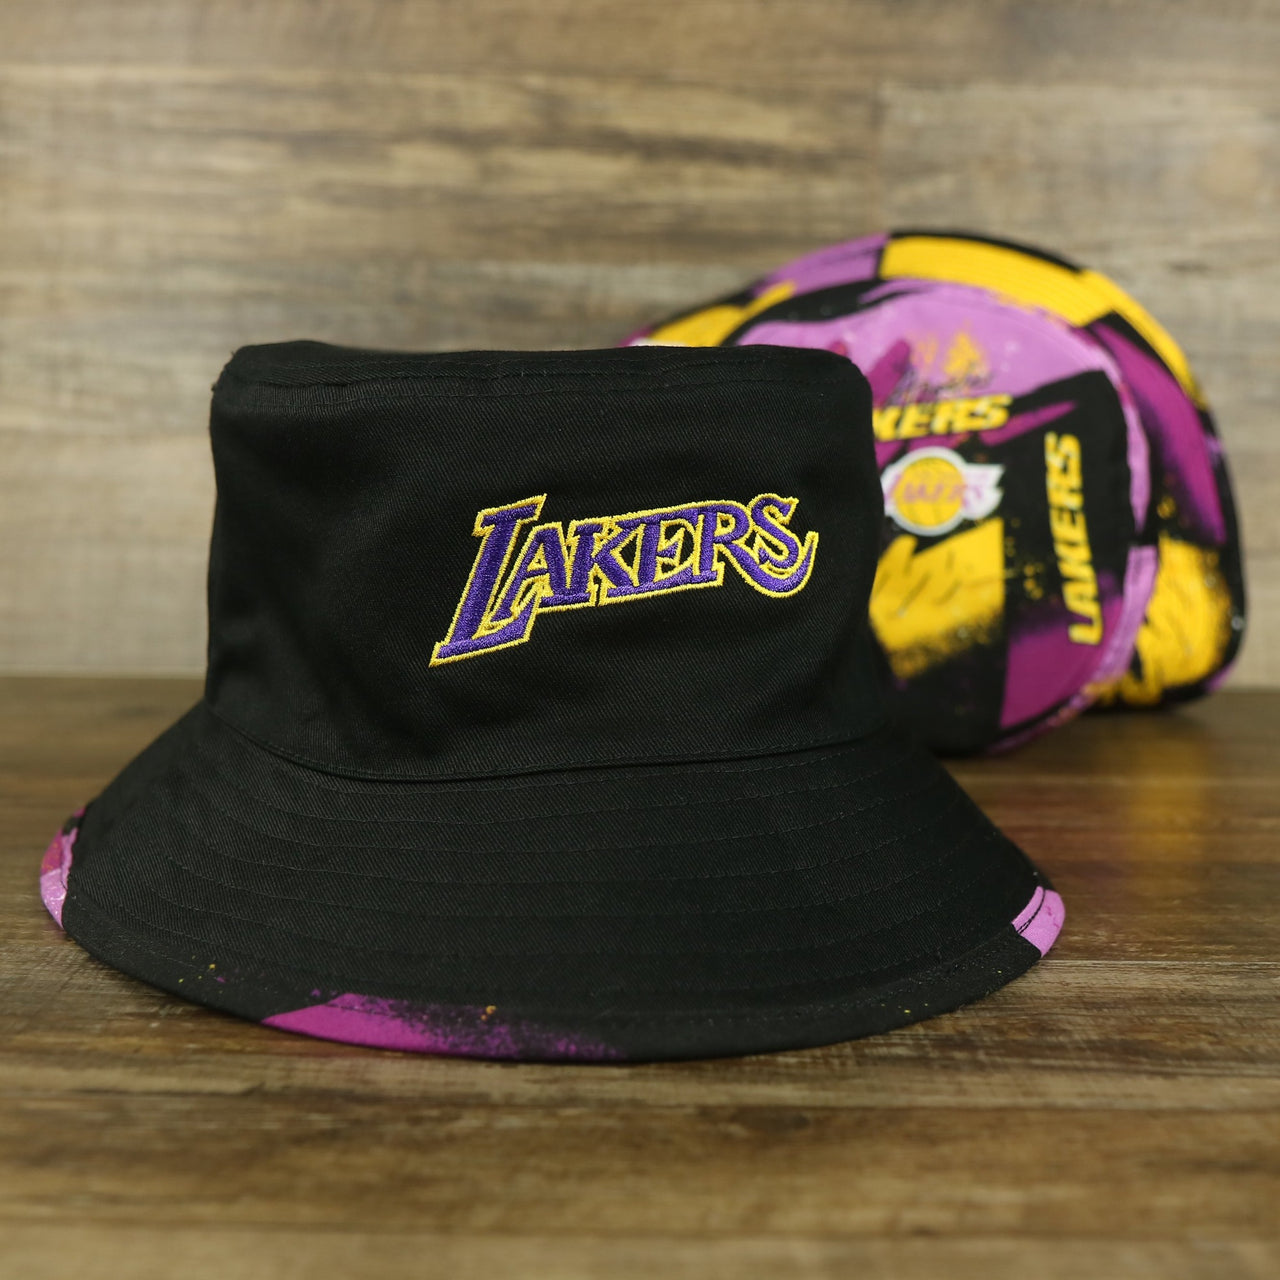 Los Angeles Lakers 90s Inspired NBA Hyper Mitchell and Ness Reversible Bucket Hat